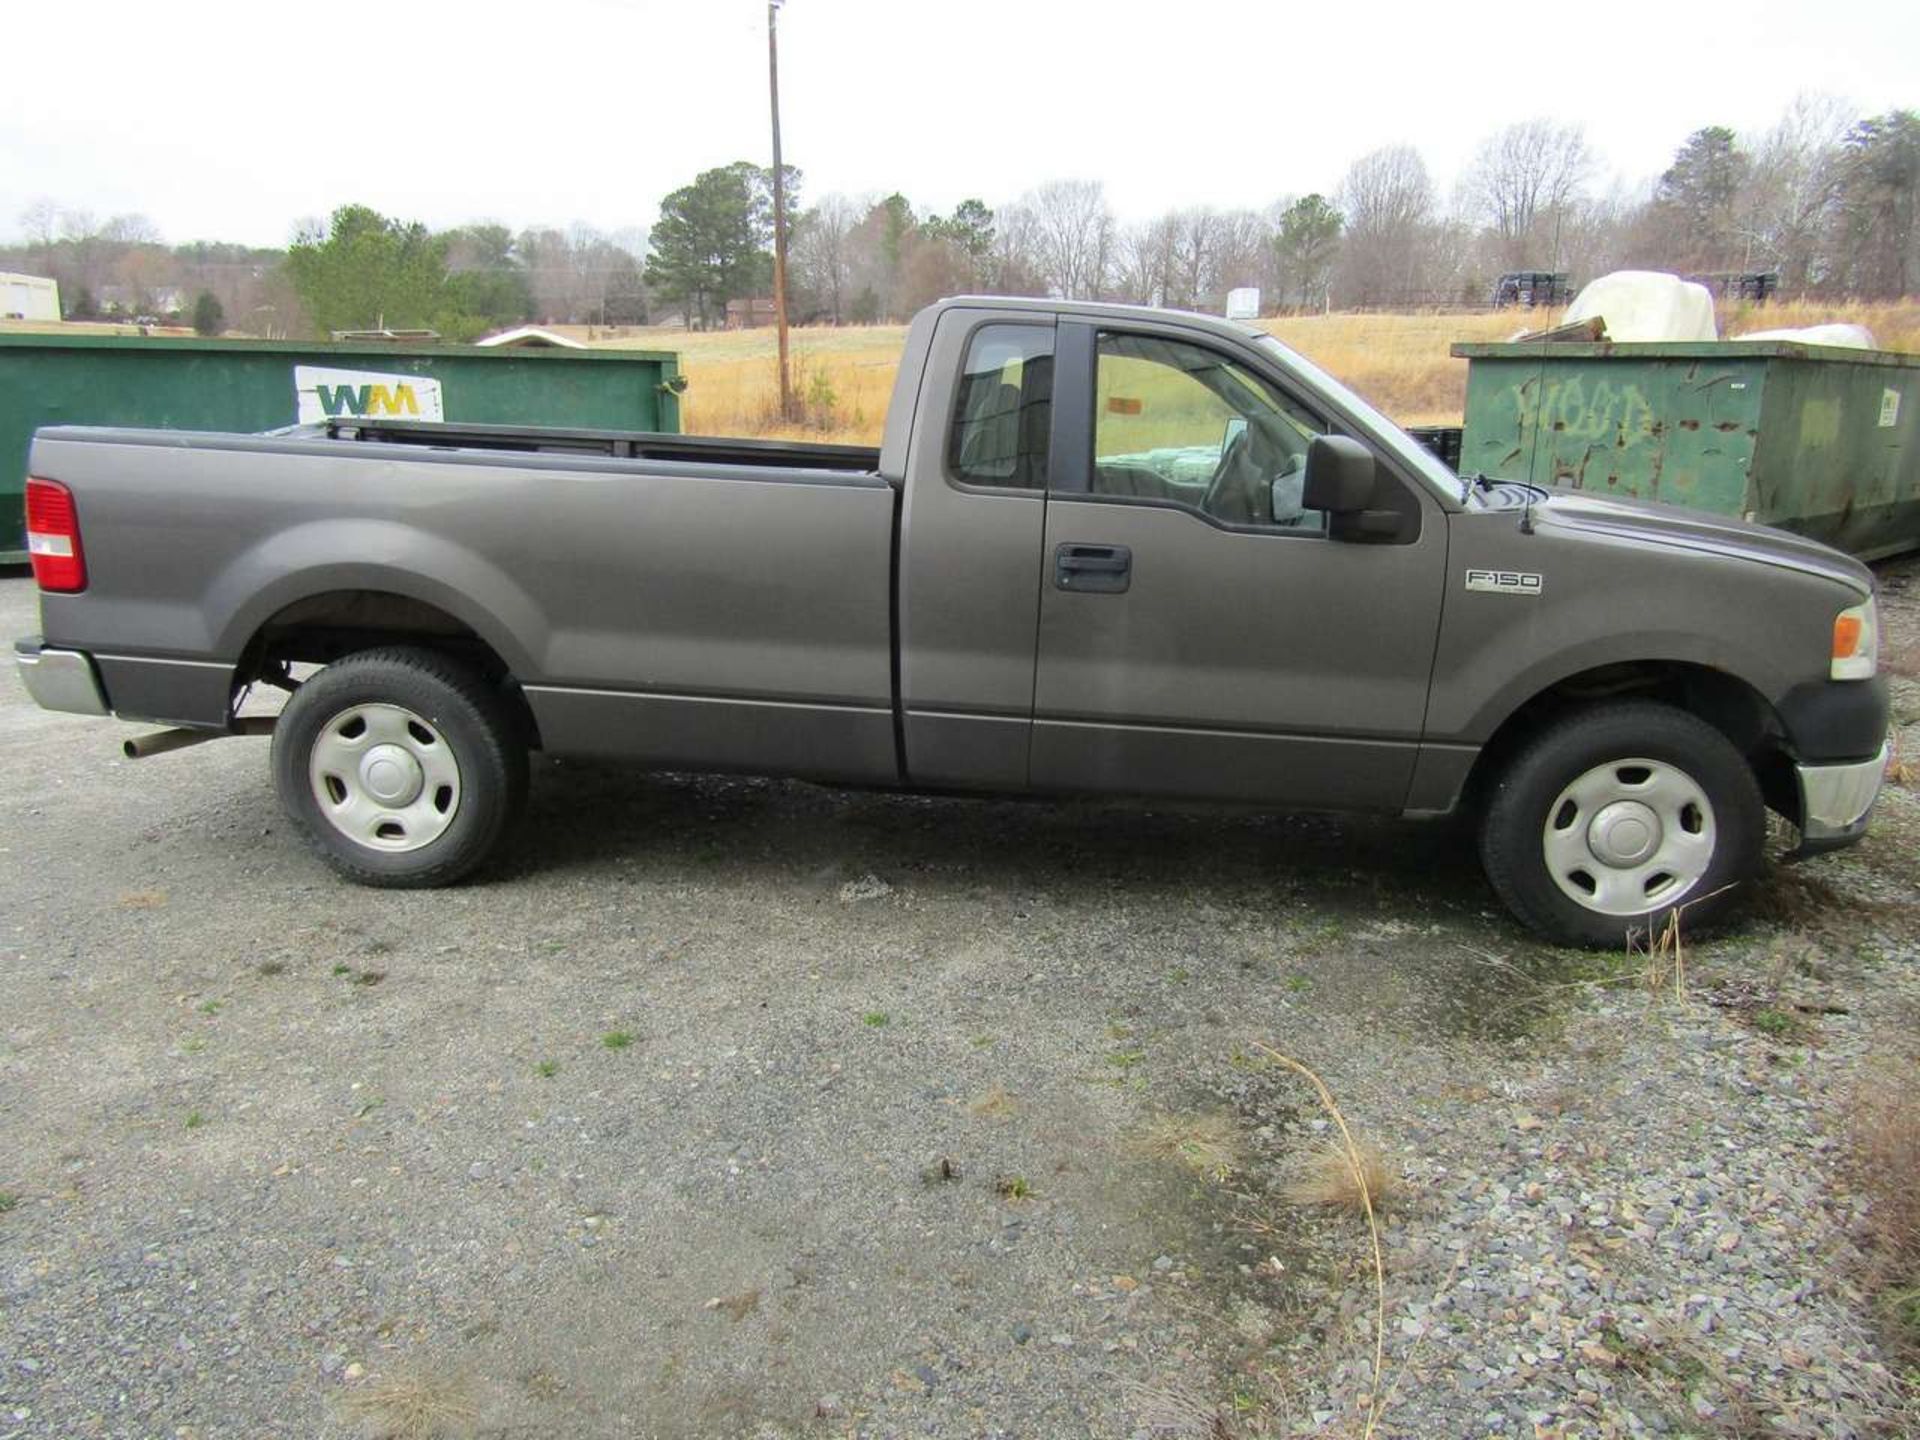 2007 Ford F-150 XL Triton Pick-Up Truck 4.6L V8 Engine, 8' Bed, GVWR 6800 lbs., 108687 Miles, S/N - Image 5 of 7